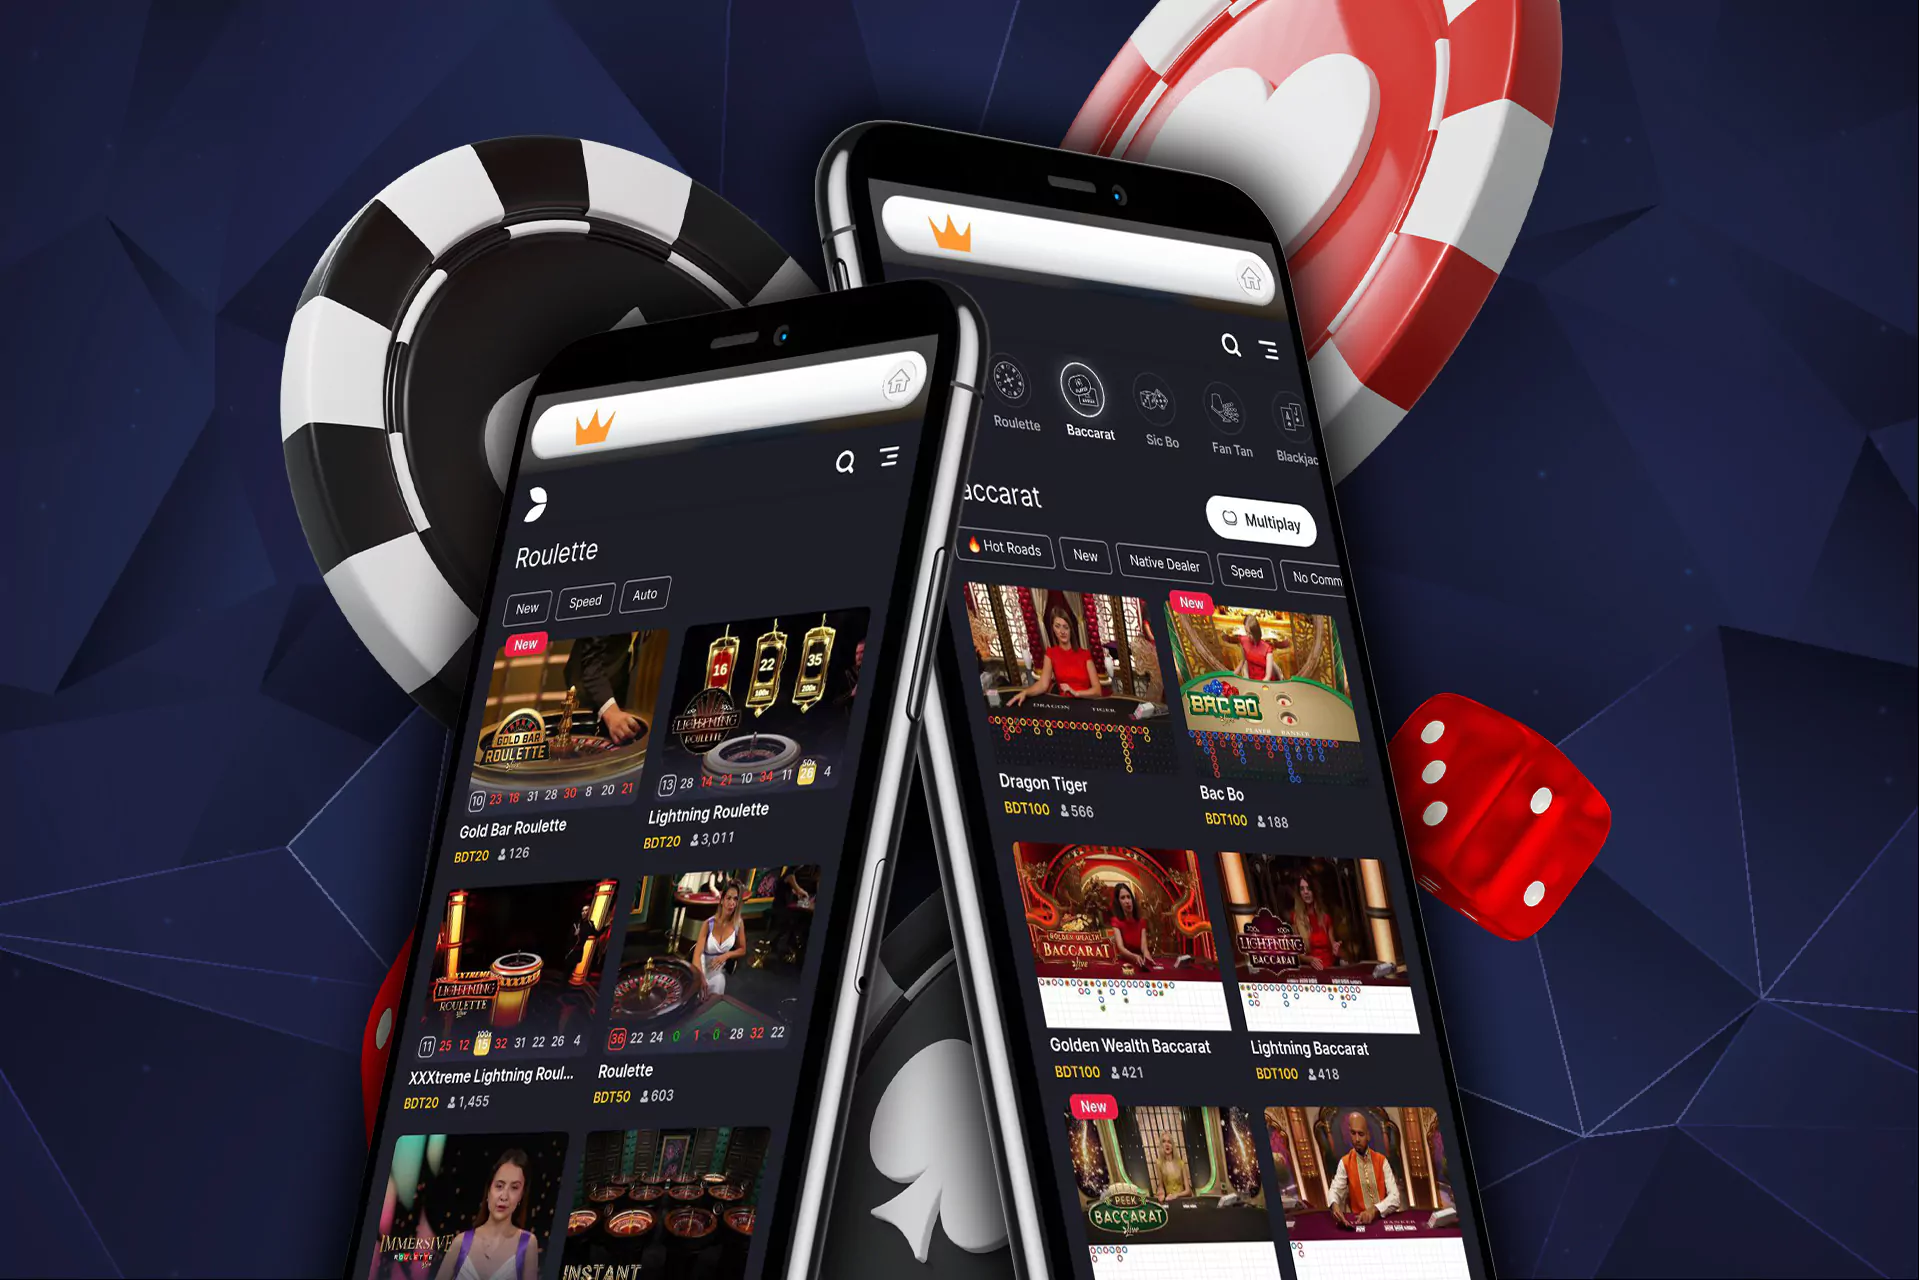 There is a wide choice of casino games un the ICCWIN app.